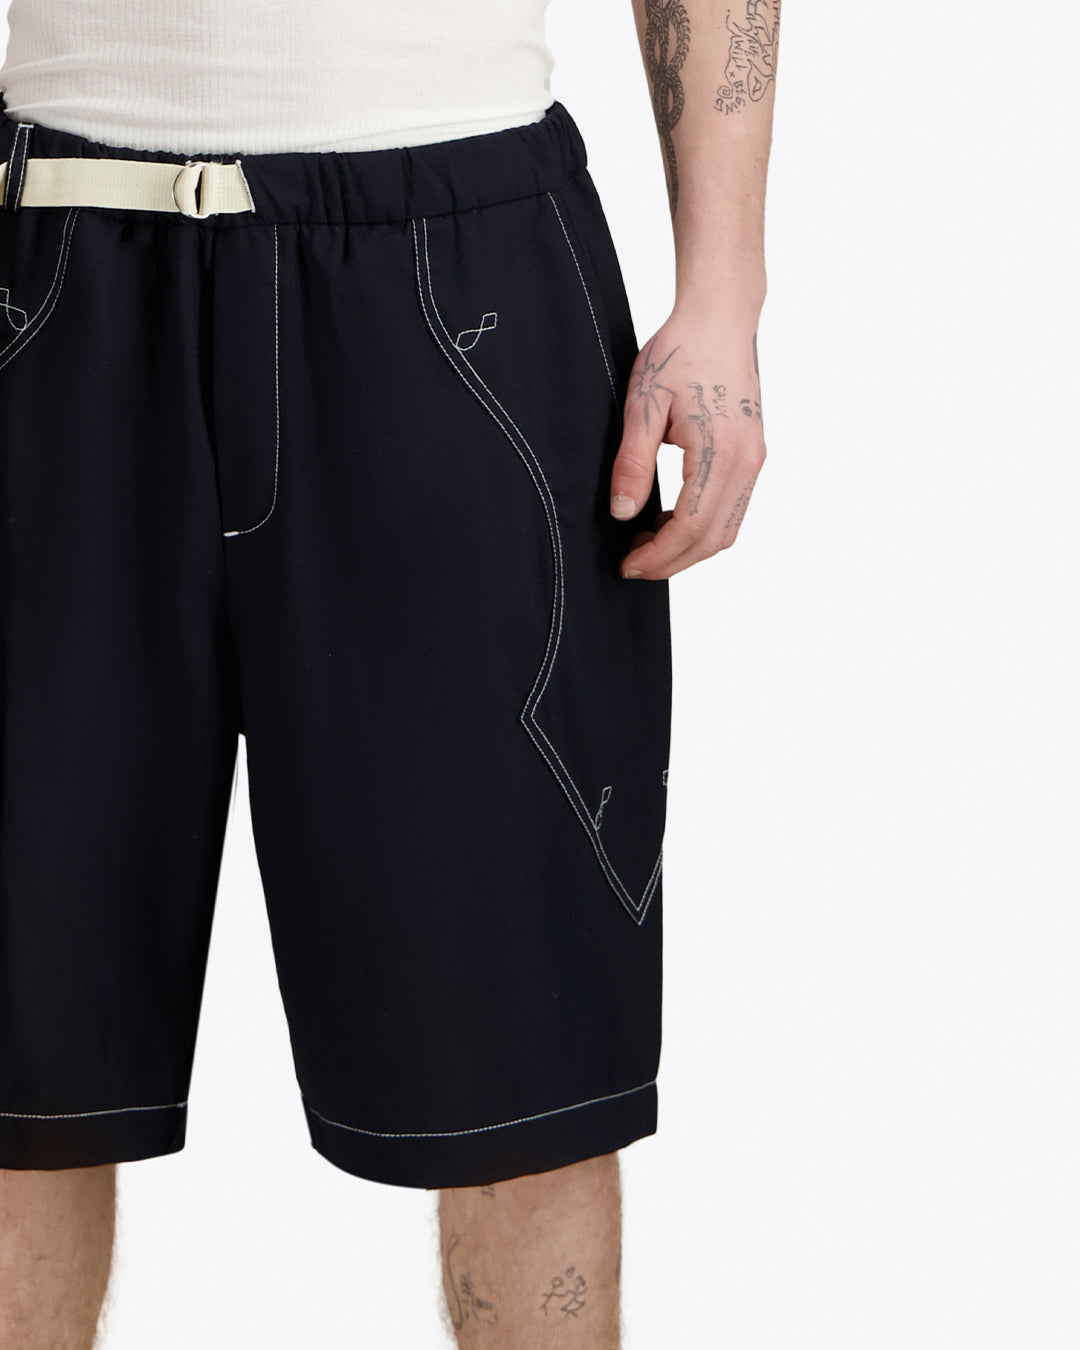 THE WESTERN CLIMBING SHORTS IN NAVY